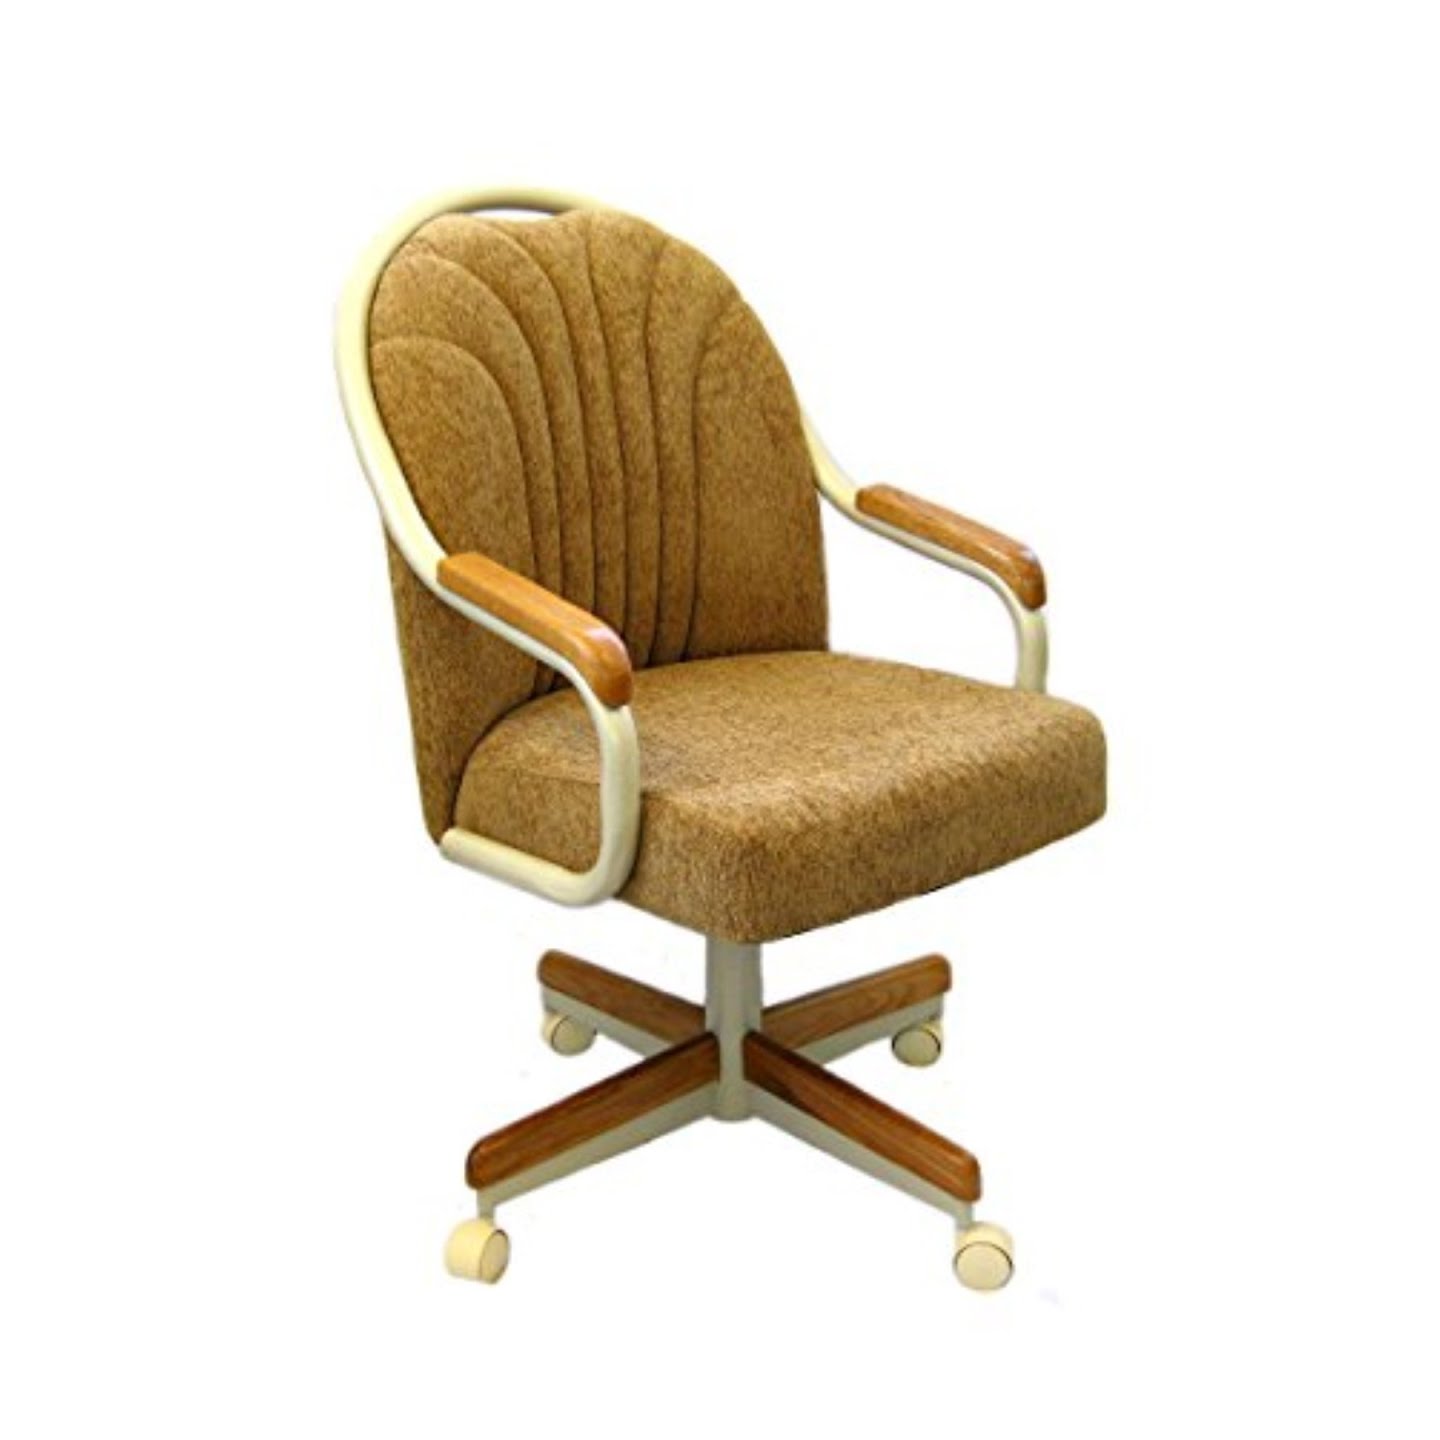 Dining Chairs With Casters Visualhunt, Vintage Dining Room Chairs With Casters